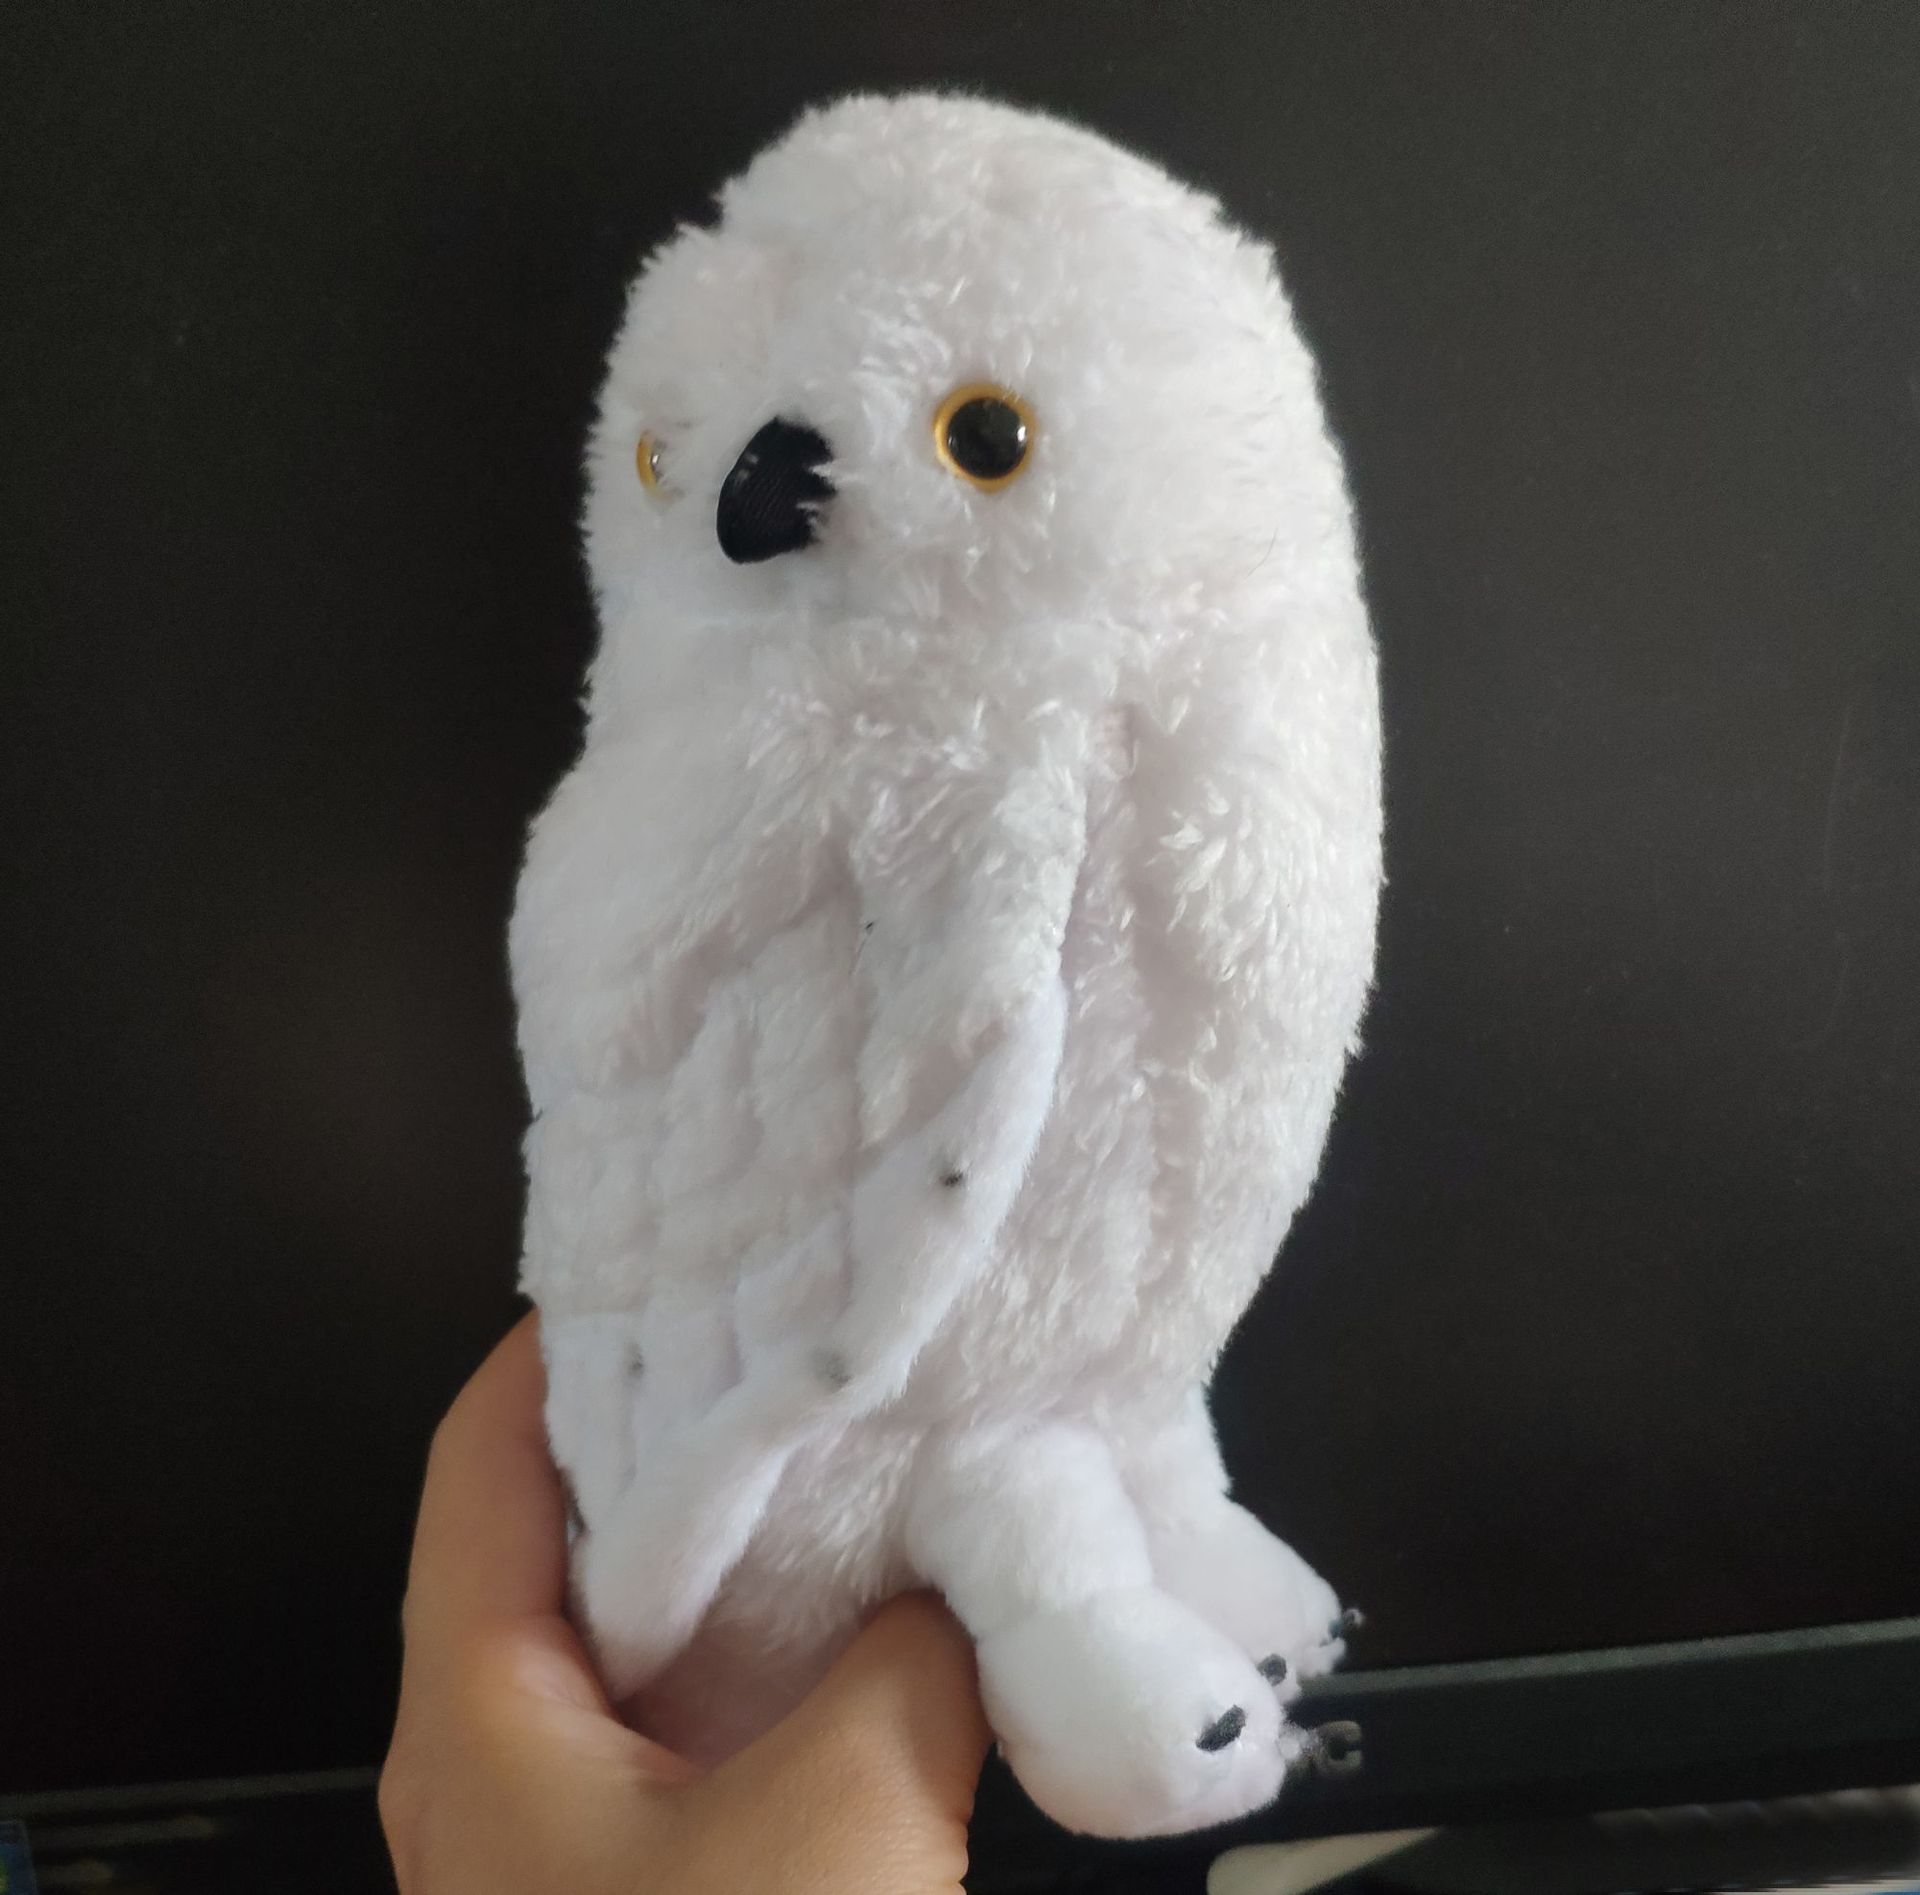 18cm Hedwig owl Stuffed Plush Animal Toy Snowy Owl For Adult Children Gifts